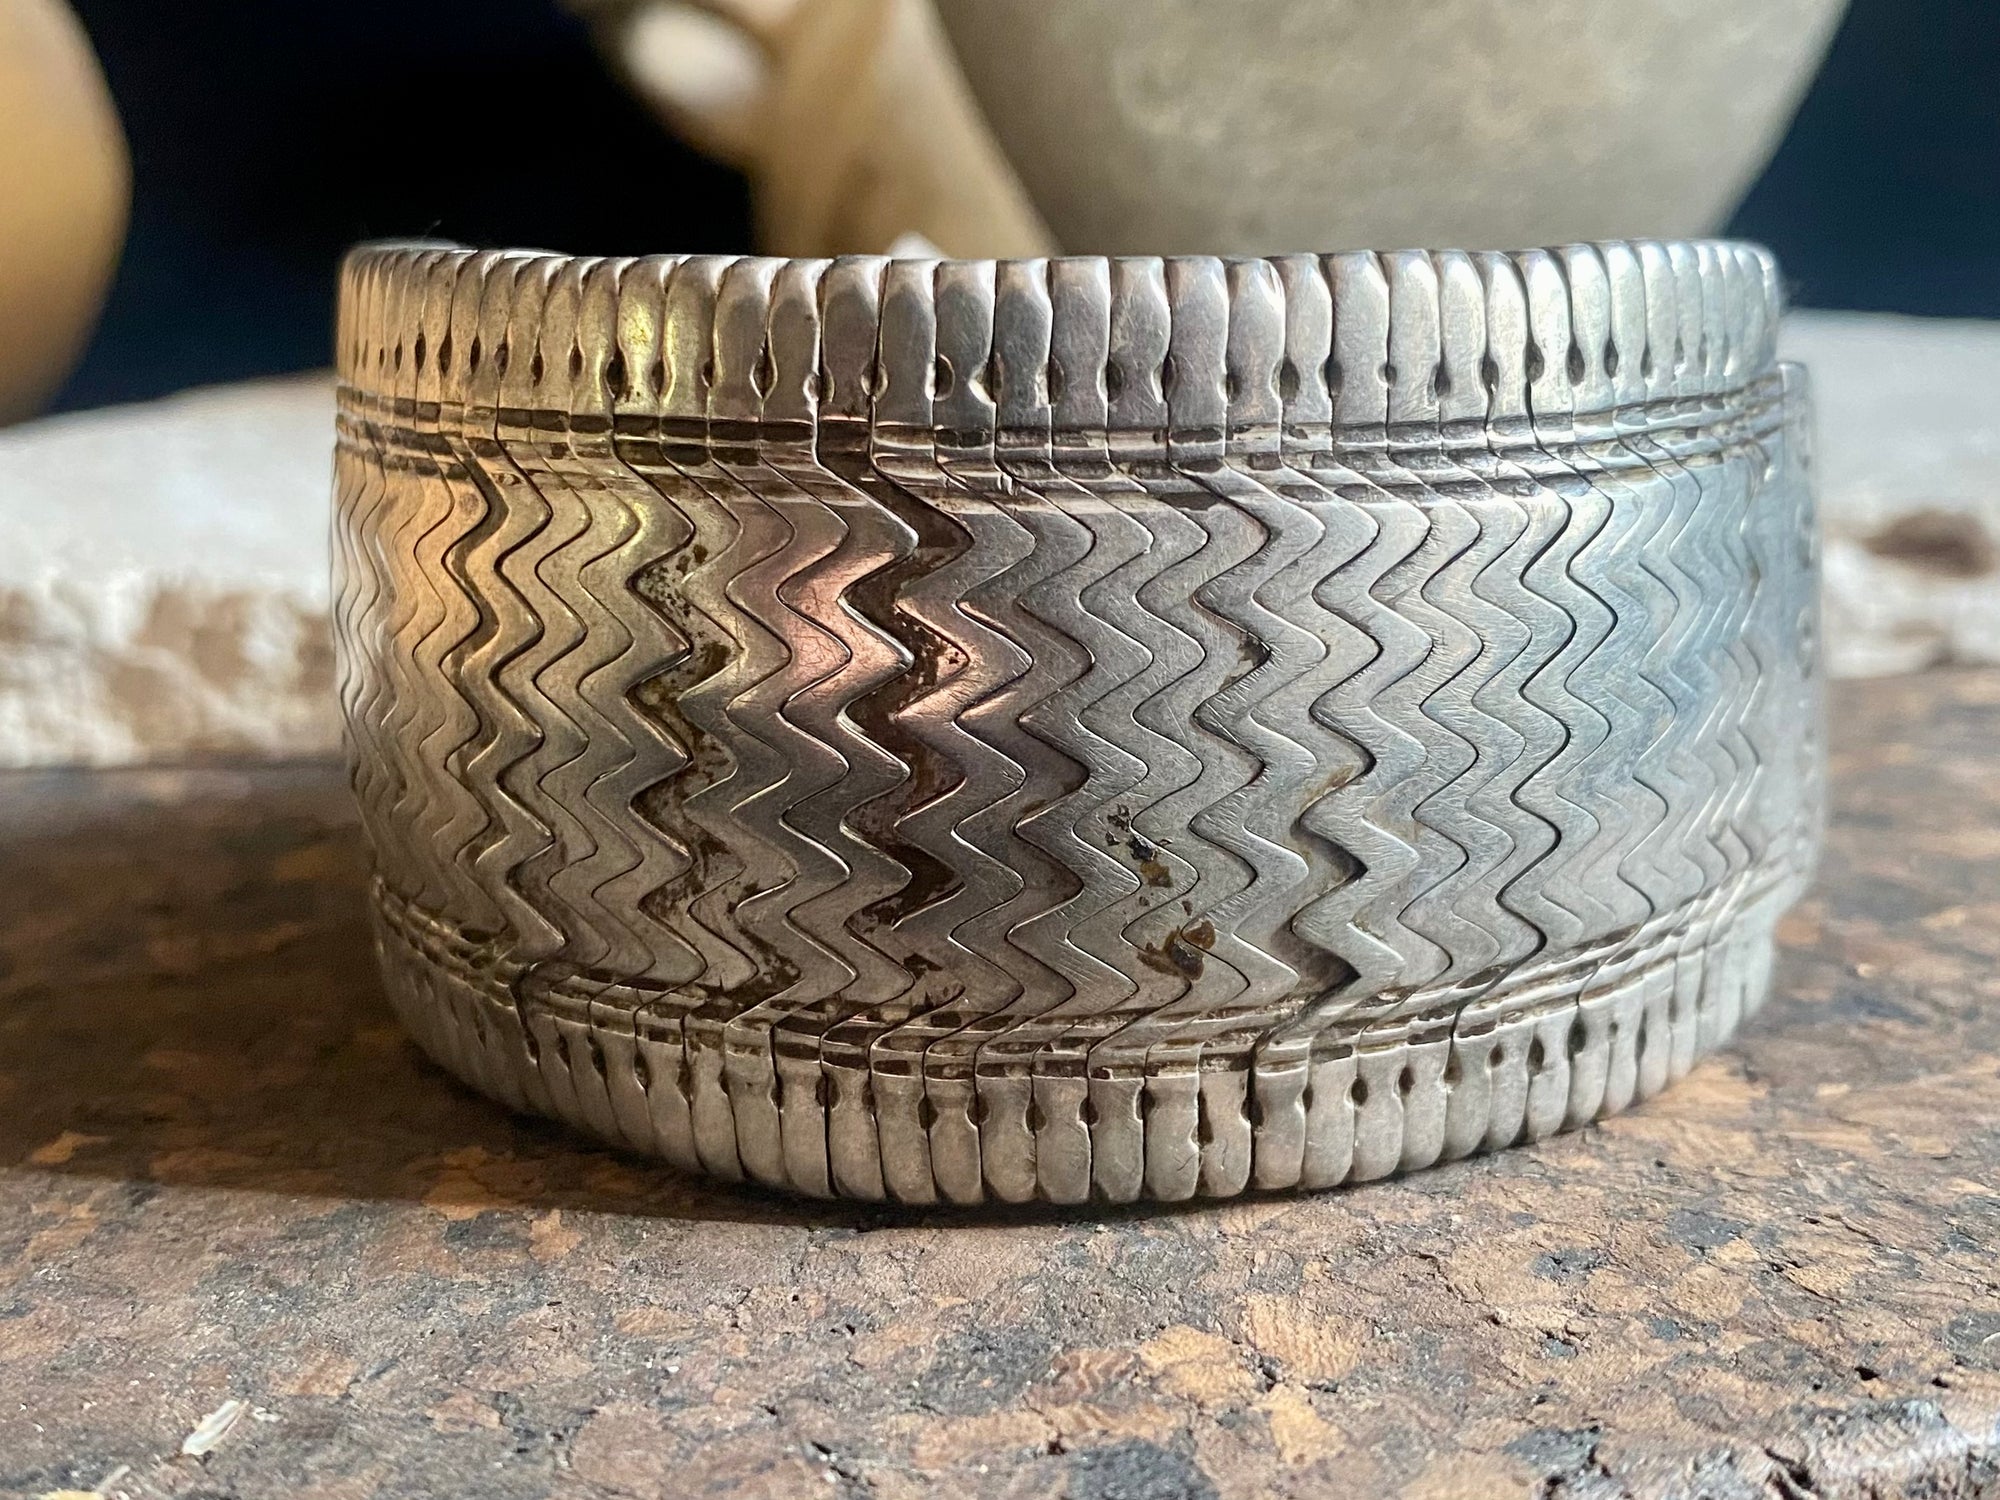 Antique bazuband bracelet, made up of interlocking components threaded onto cord with toggle closure. Early 20th century or earlier, high grade silver. This is an excellent example, and is a very collectible yet wearable piece of jewellery. Weight 94 grams. Inside circumference 21 cm. Height 4 cm, length 17 cm